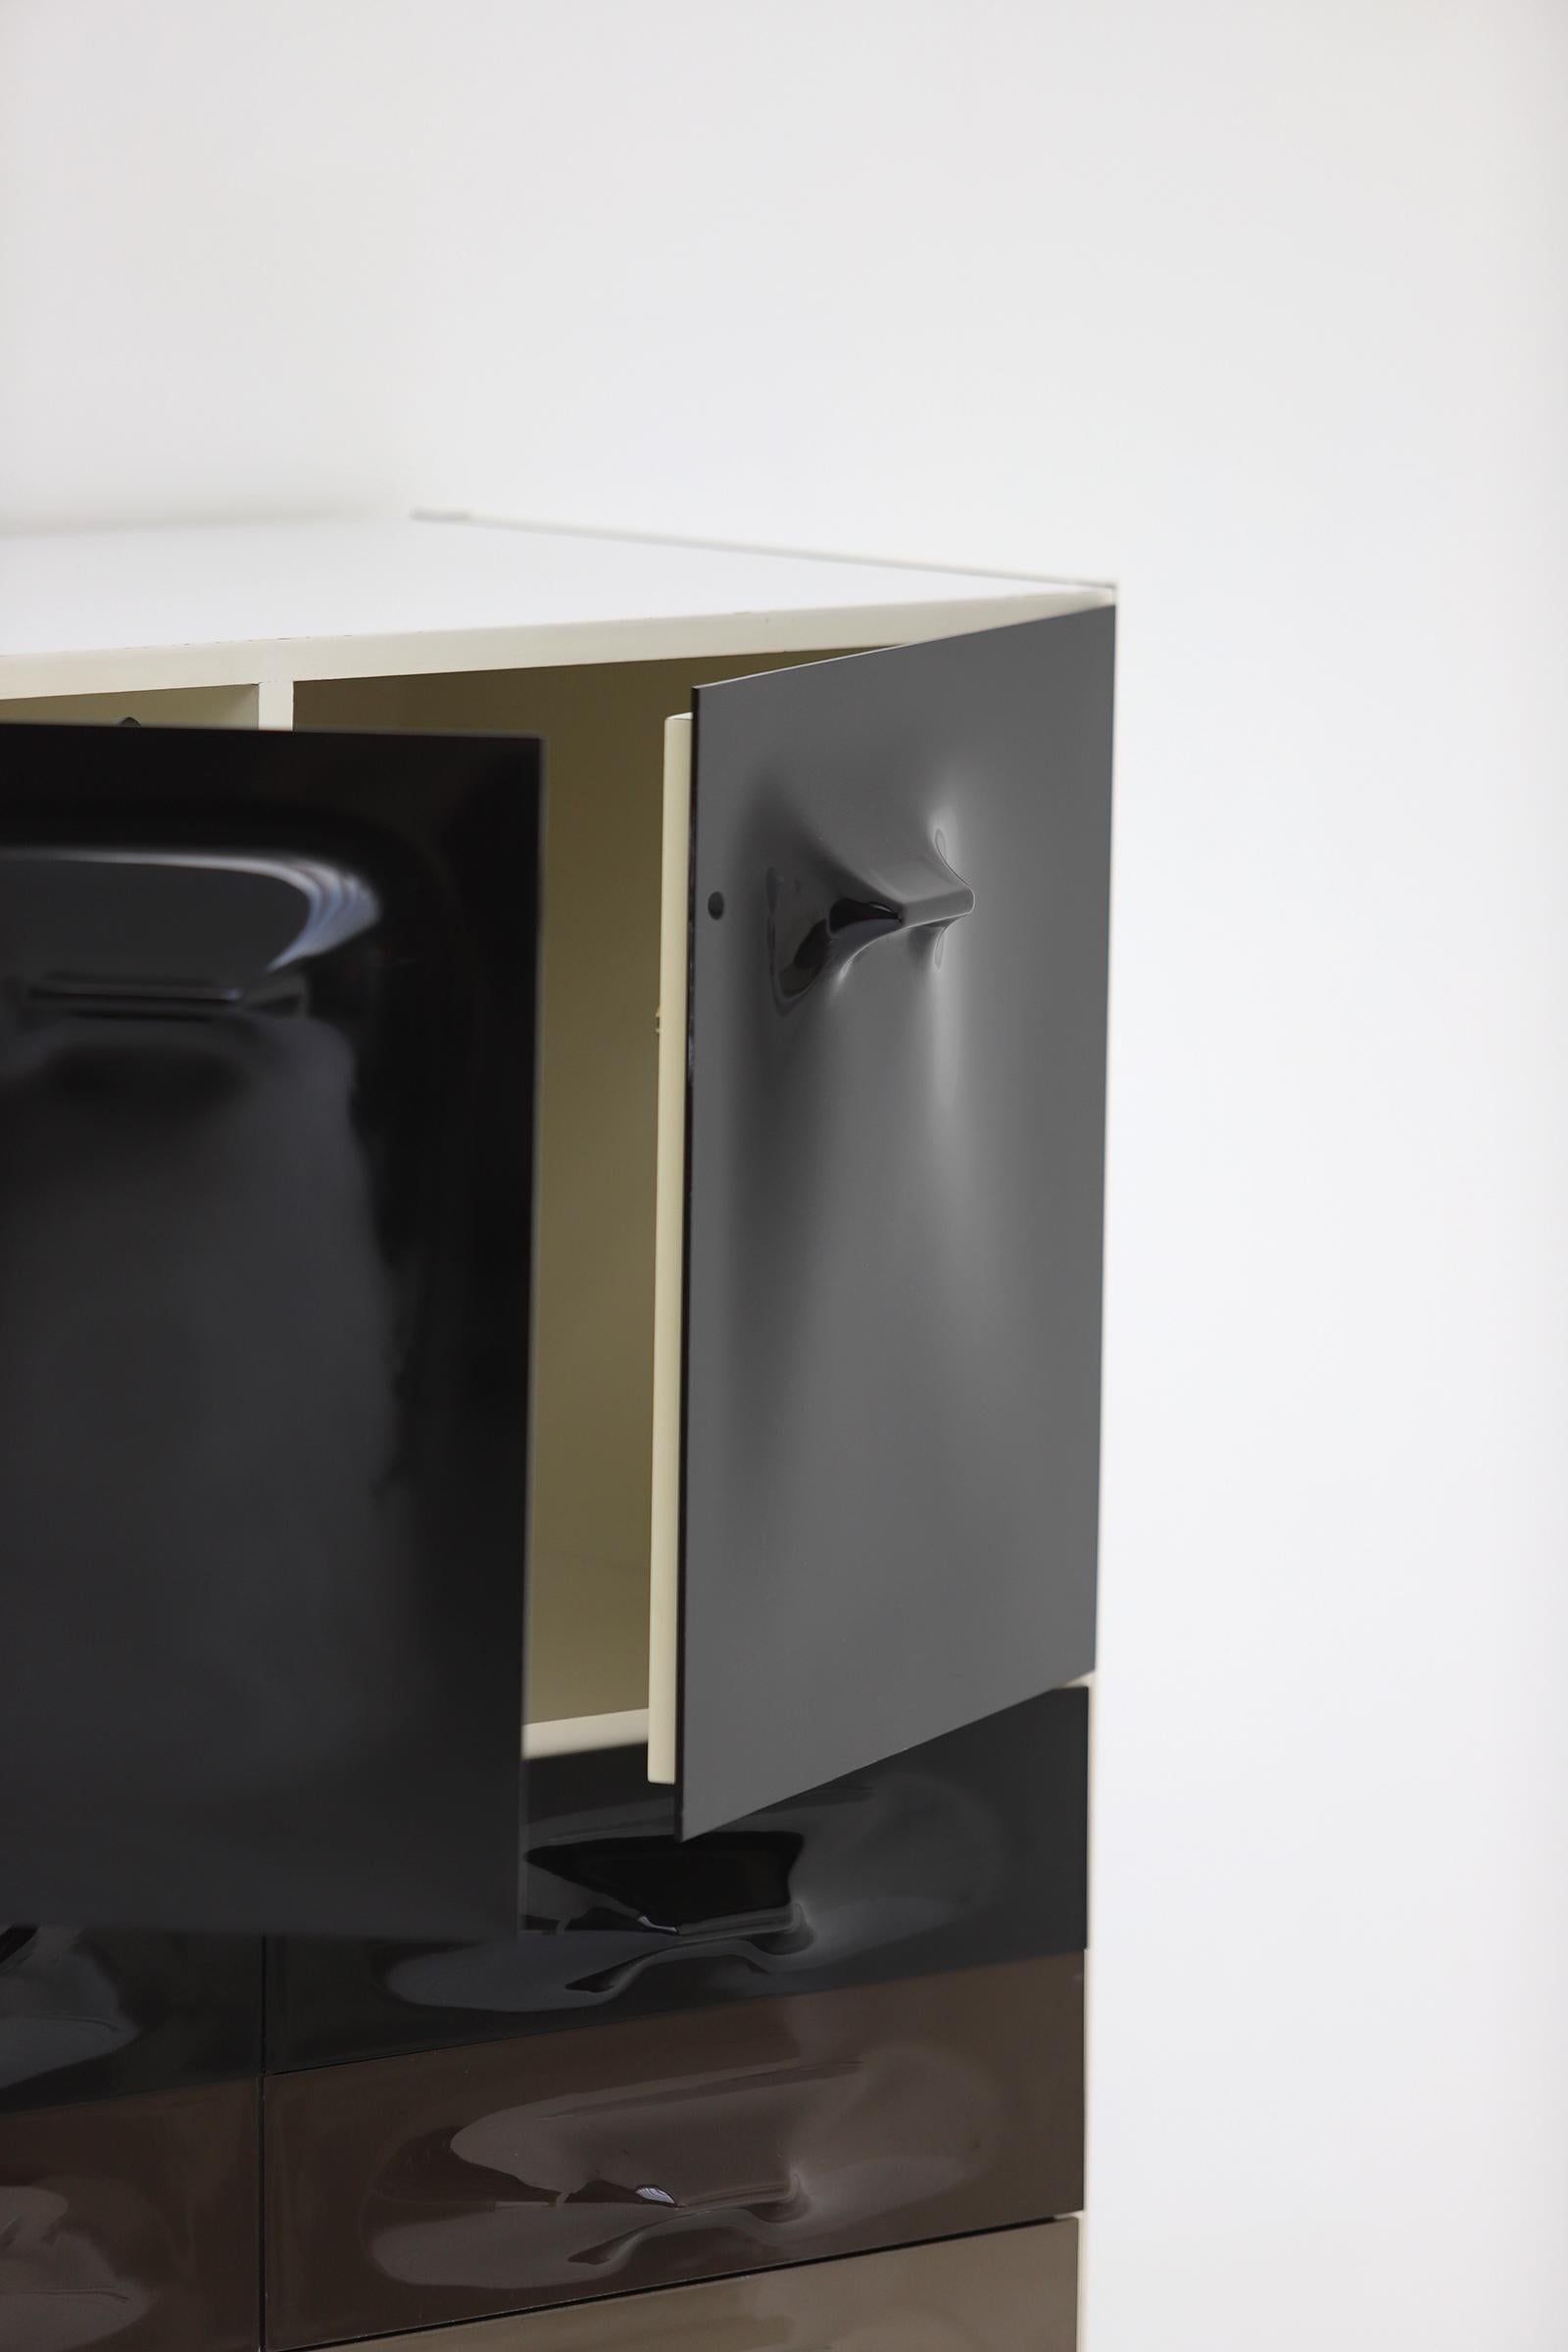 Metal Modern space age DF2000 cabinet by Raymond Loewy for Doubinsky Frères in 1968.